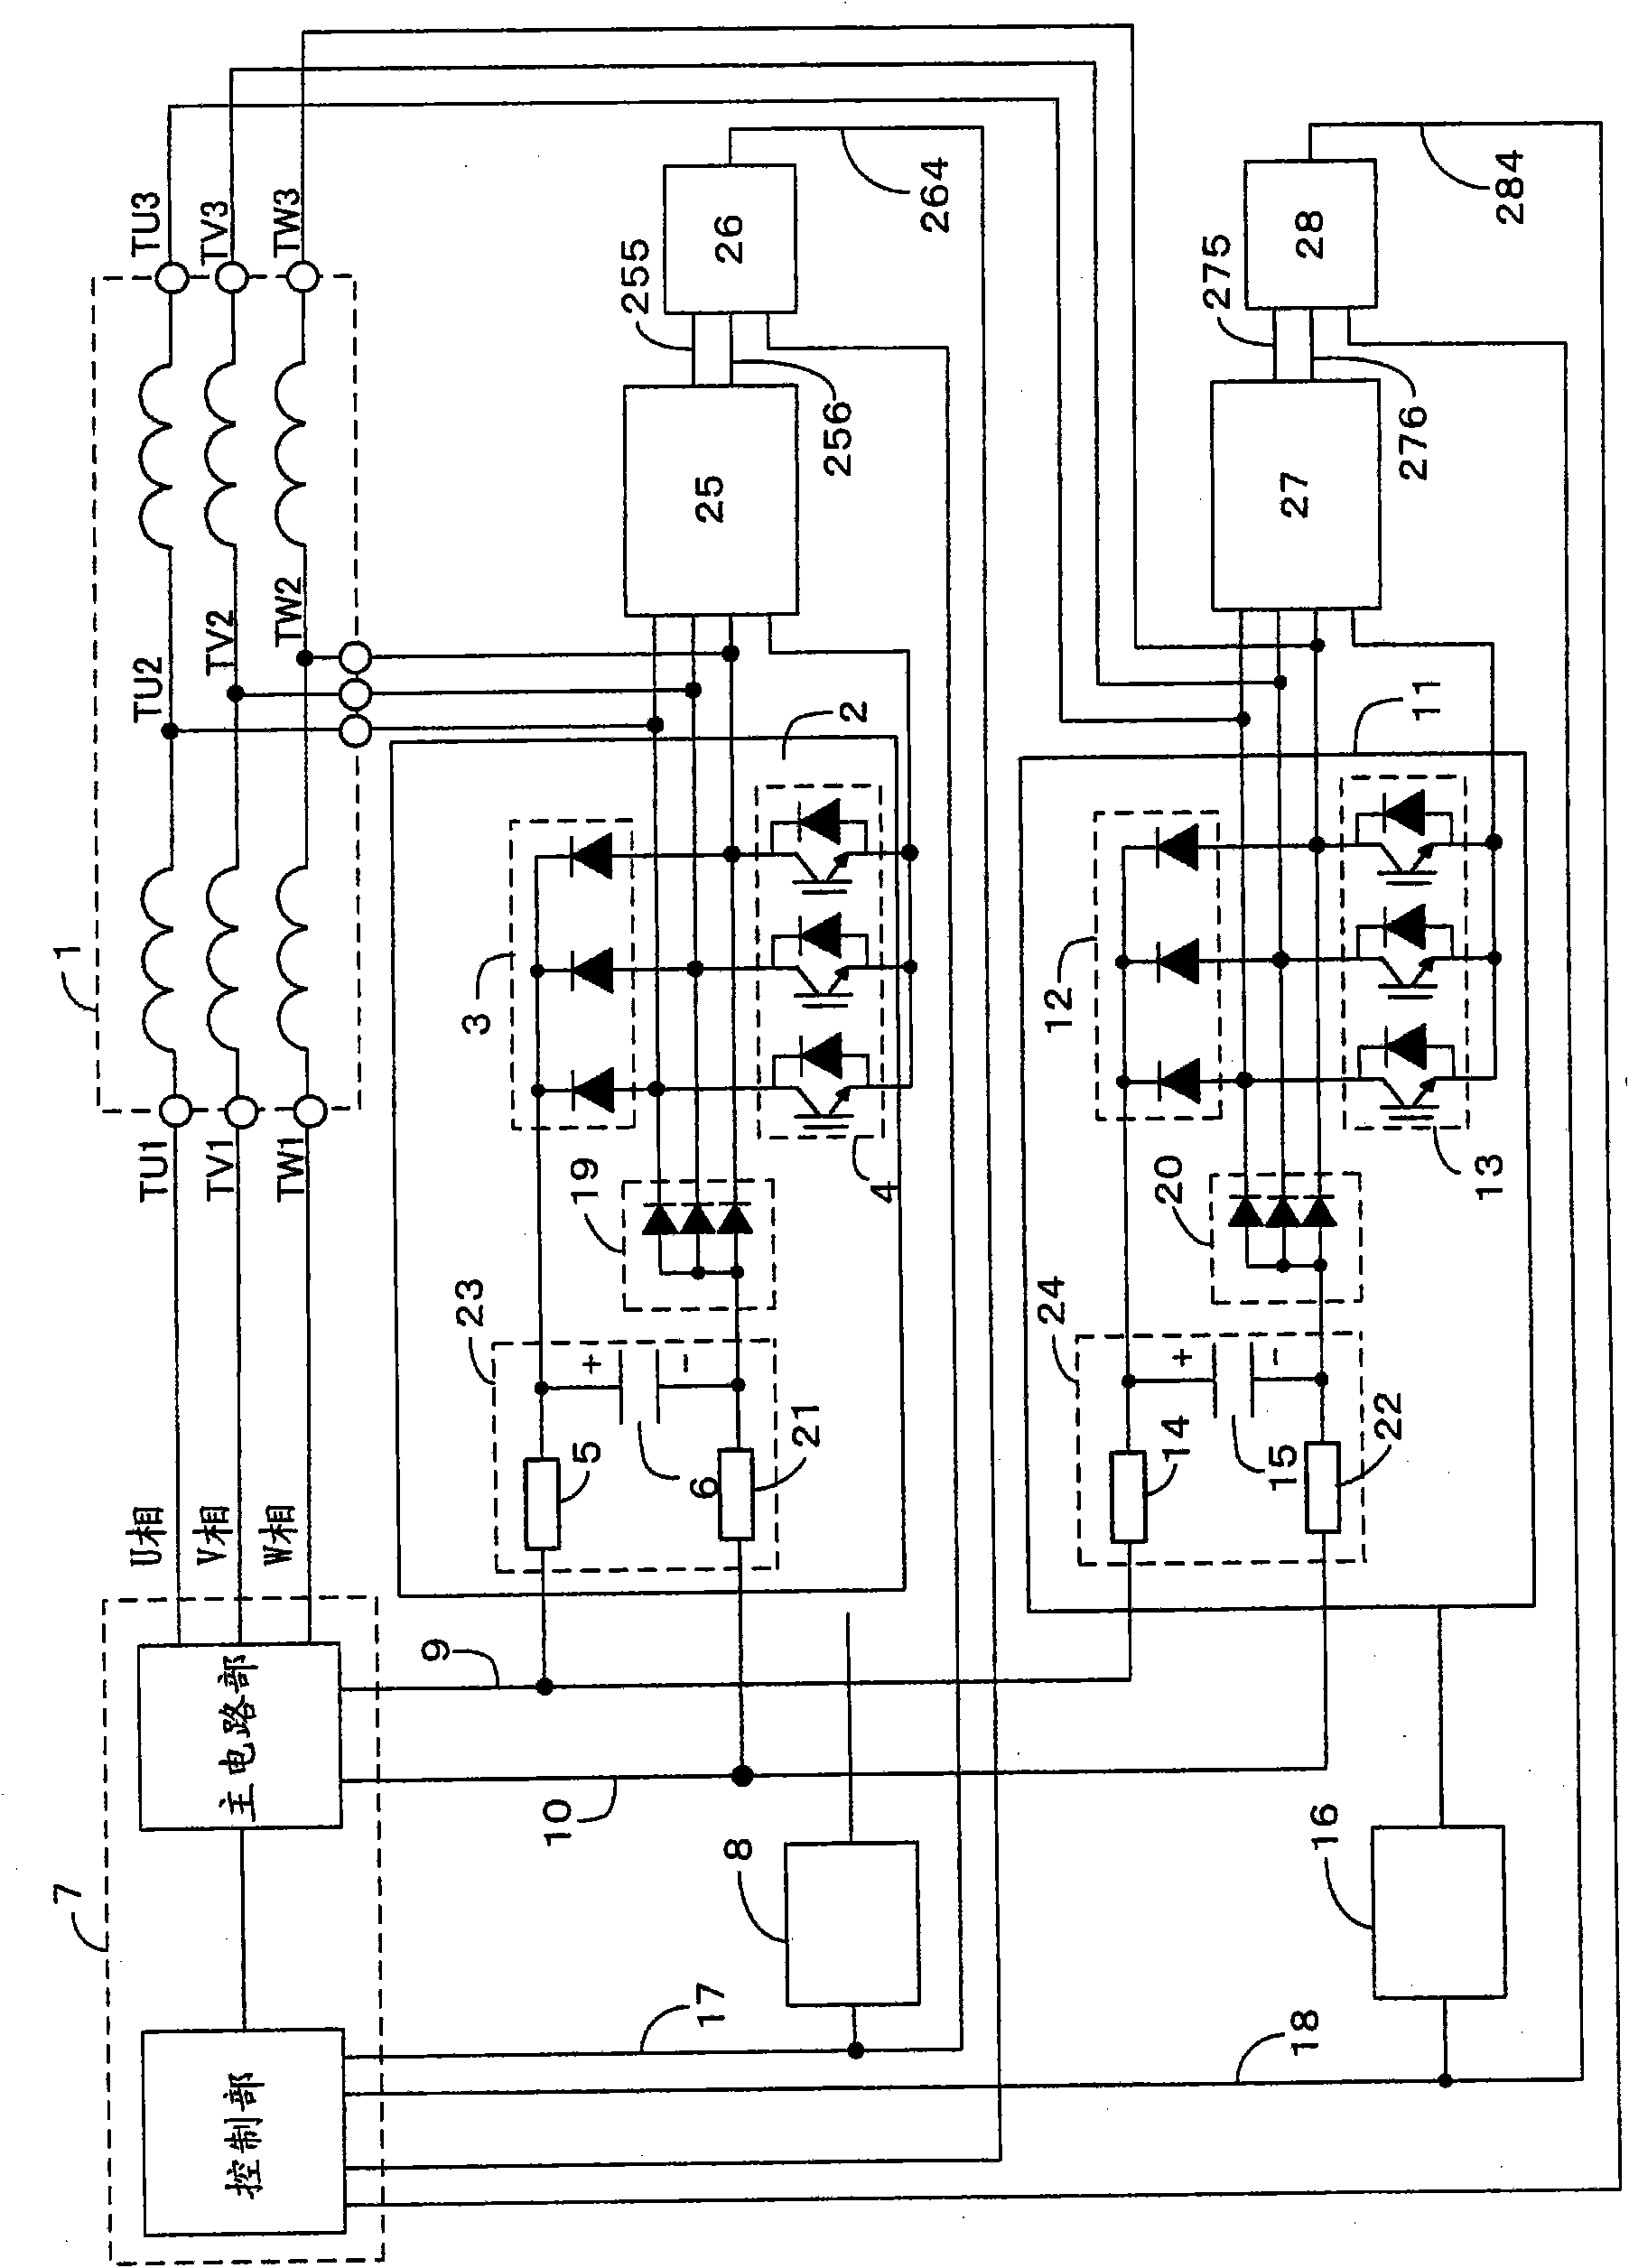 Winding change-over switch of three-phase AC motor